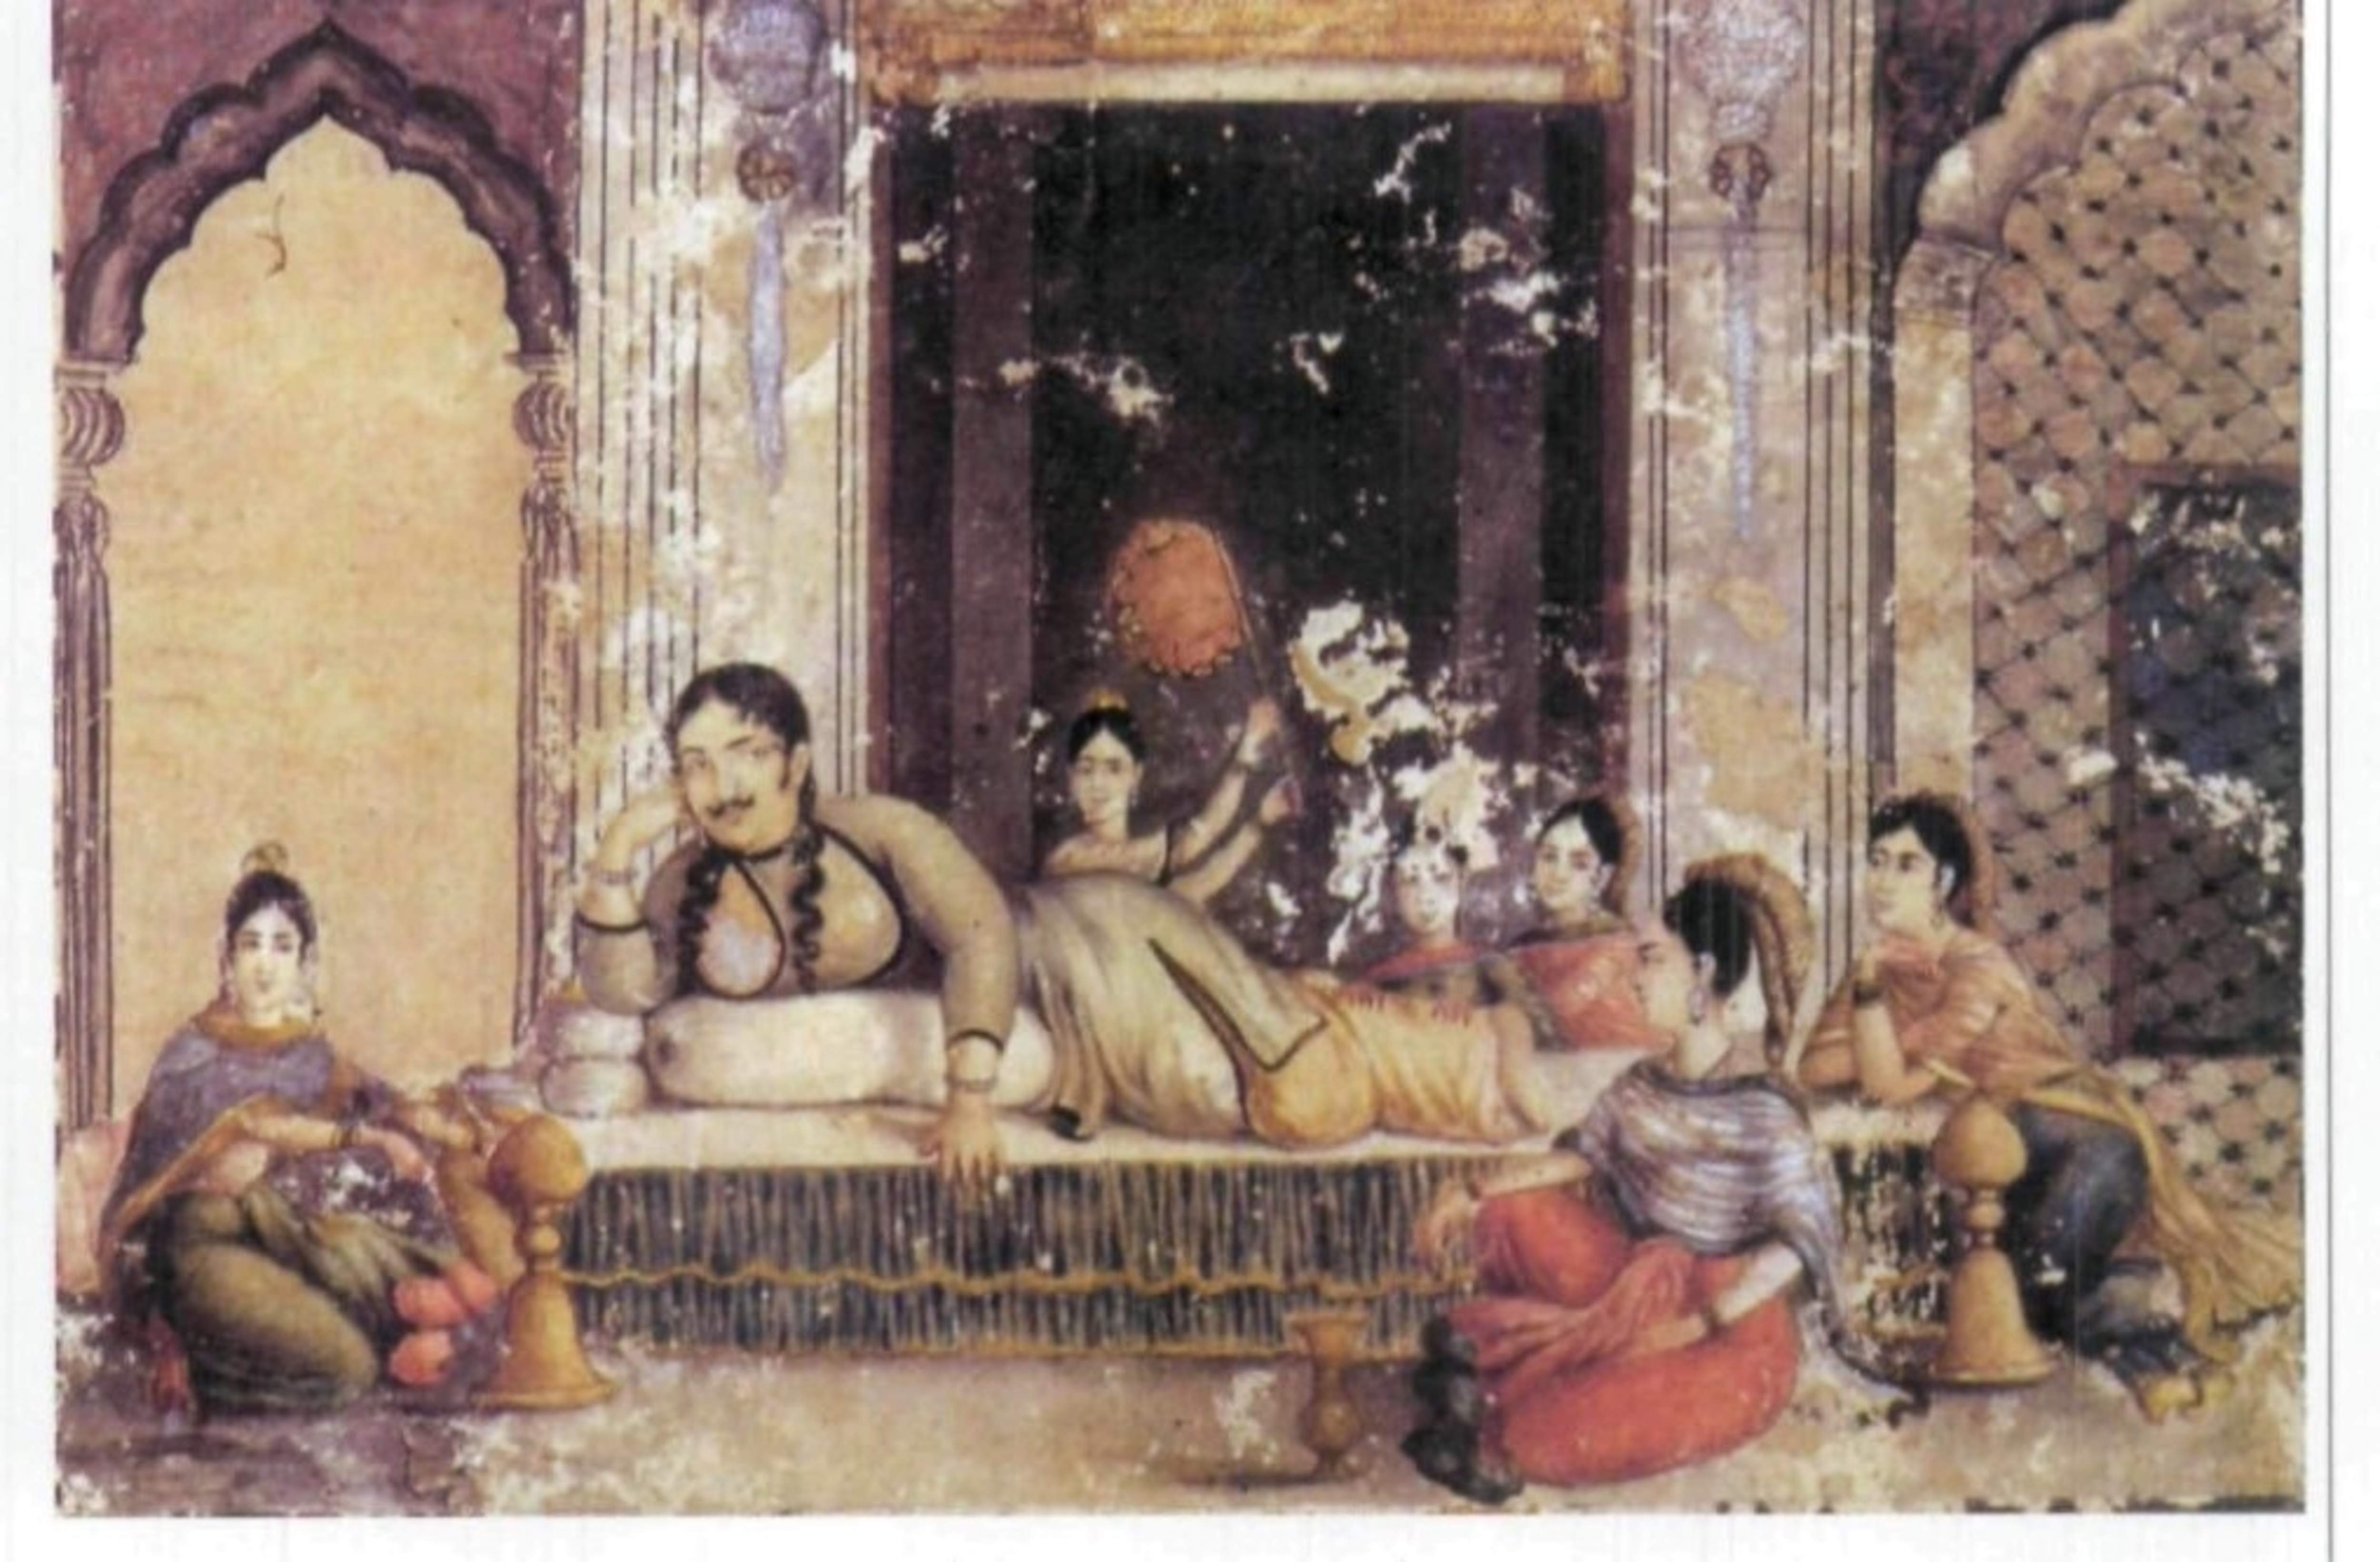 Nawab Wajid Ali Shah in the 'Fairy House', a sort of harem for girls who caught his eye, guarded by African women. c. 1800. (Rosie Llewellyn-Jones, Pinterest)